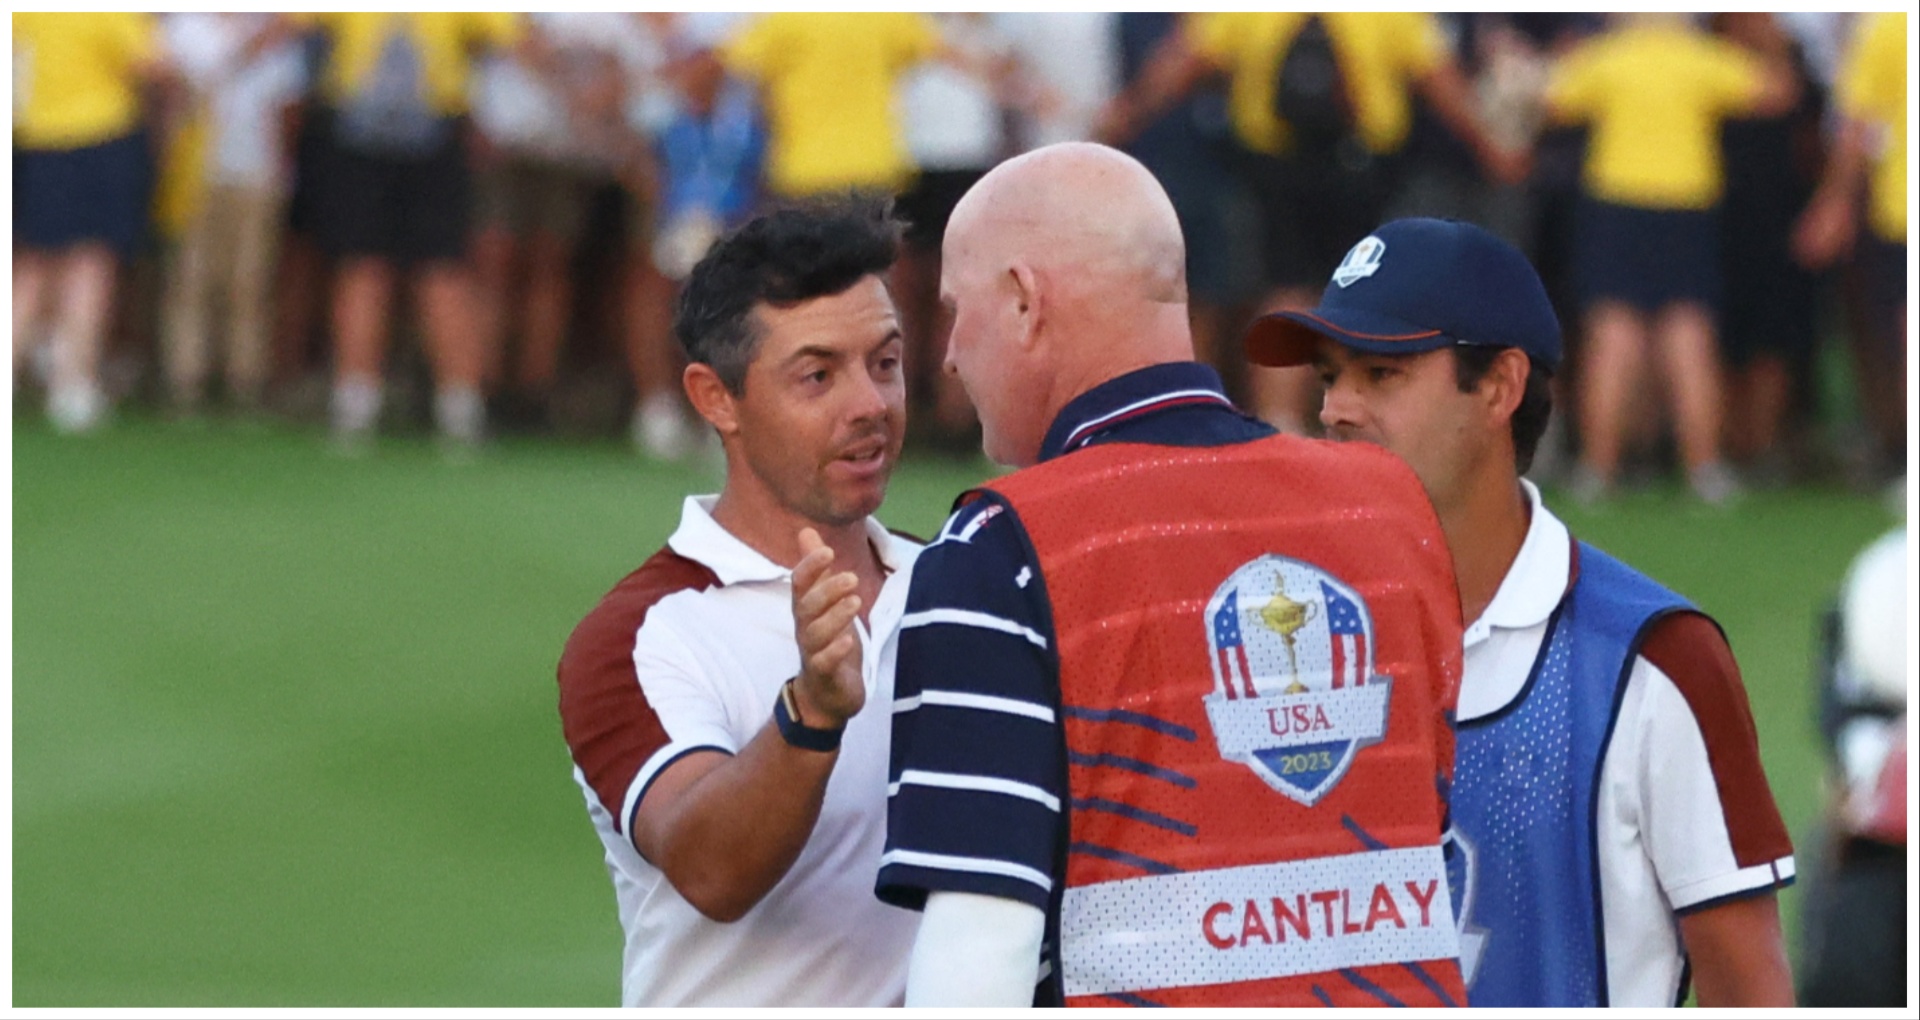 REVEALED: The text Joe LaCava sent to Rory McIlroy after furious Ryder Cup row